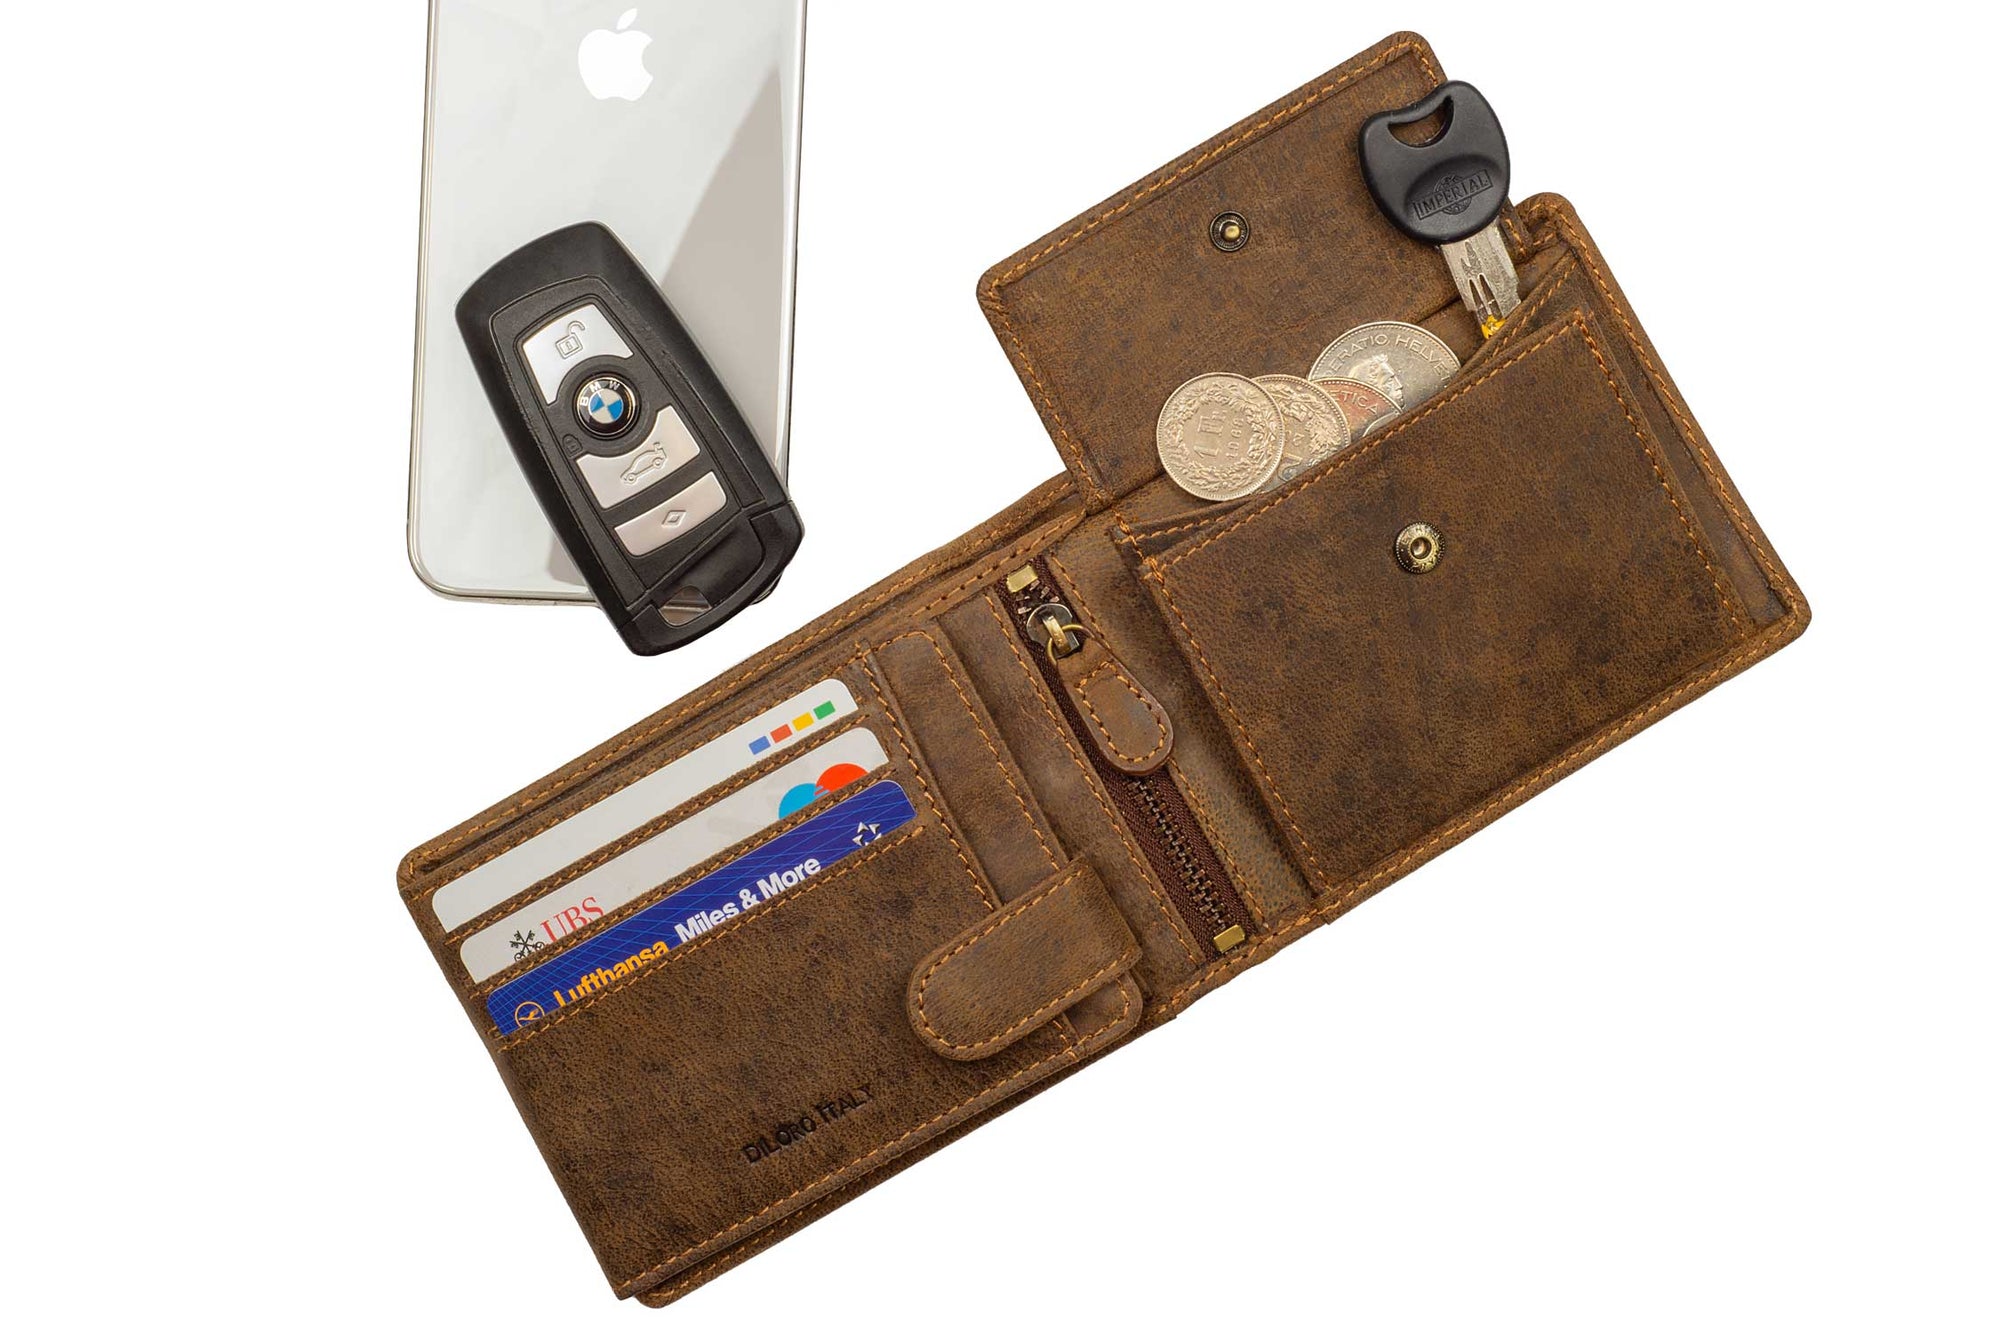 DiLoro Men's Leather Bifold Flip ID Zip Coin Wallet with RFID Protection - Shown in Dark Hunter Brown